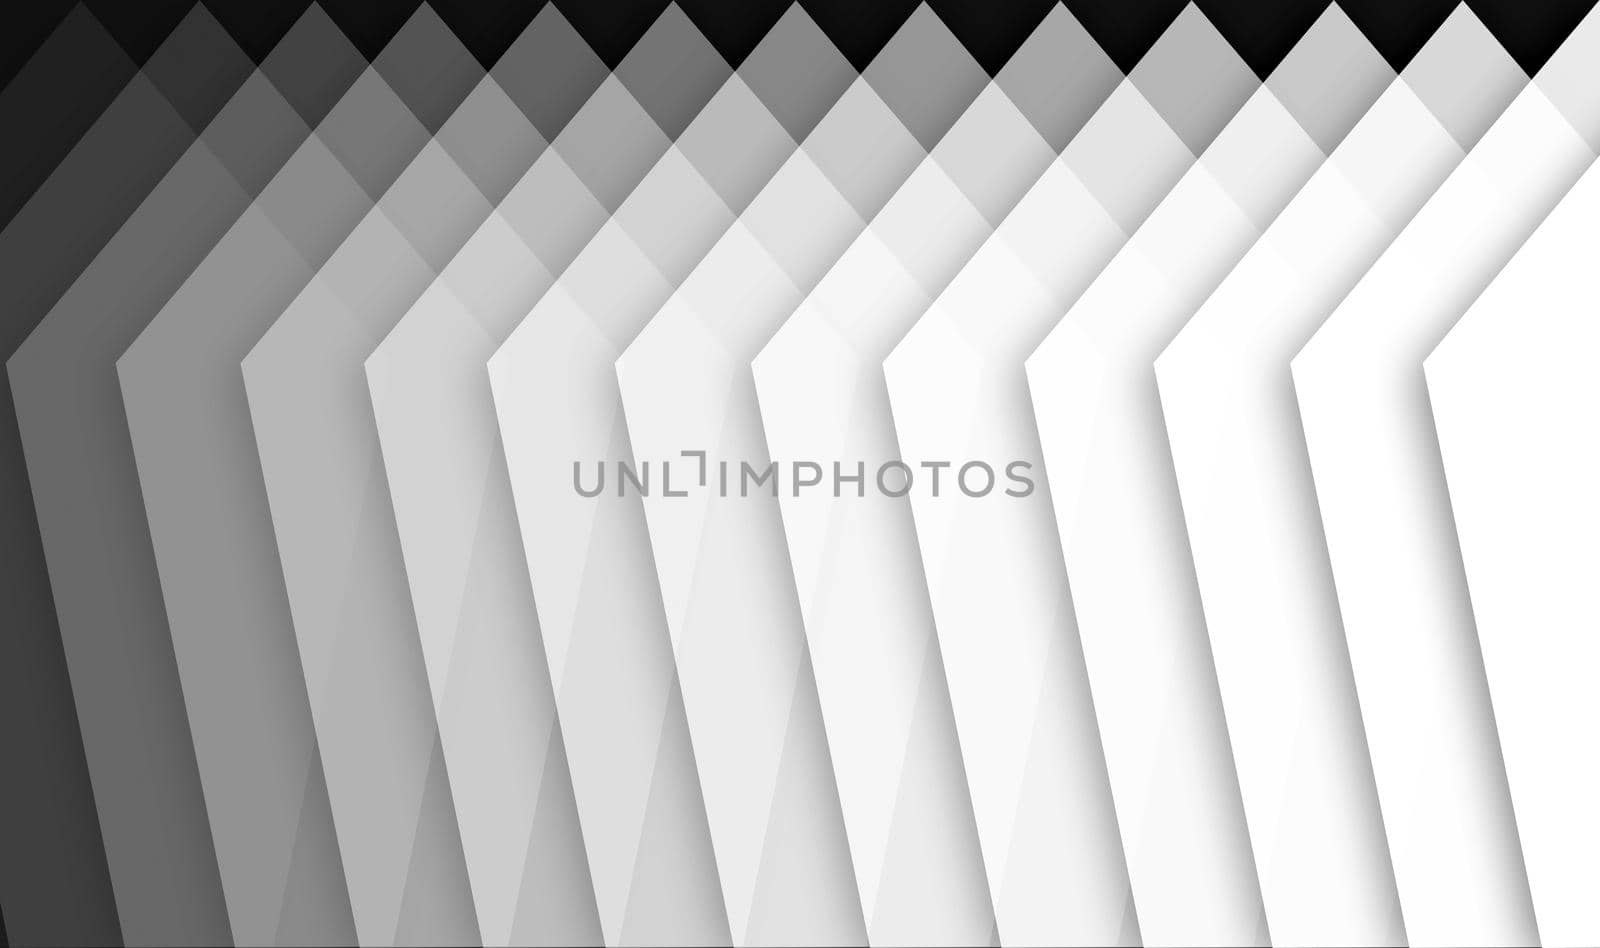 basic shapes showing an abstract gradient from black to white by tabishere